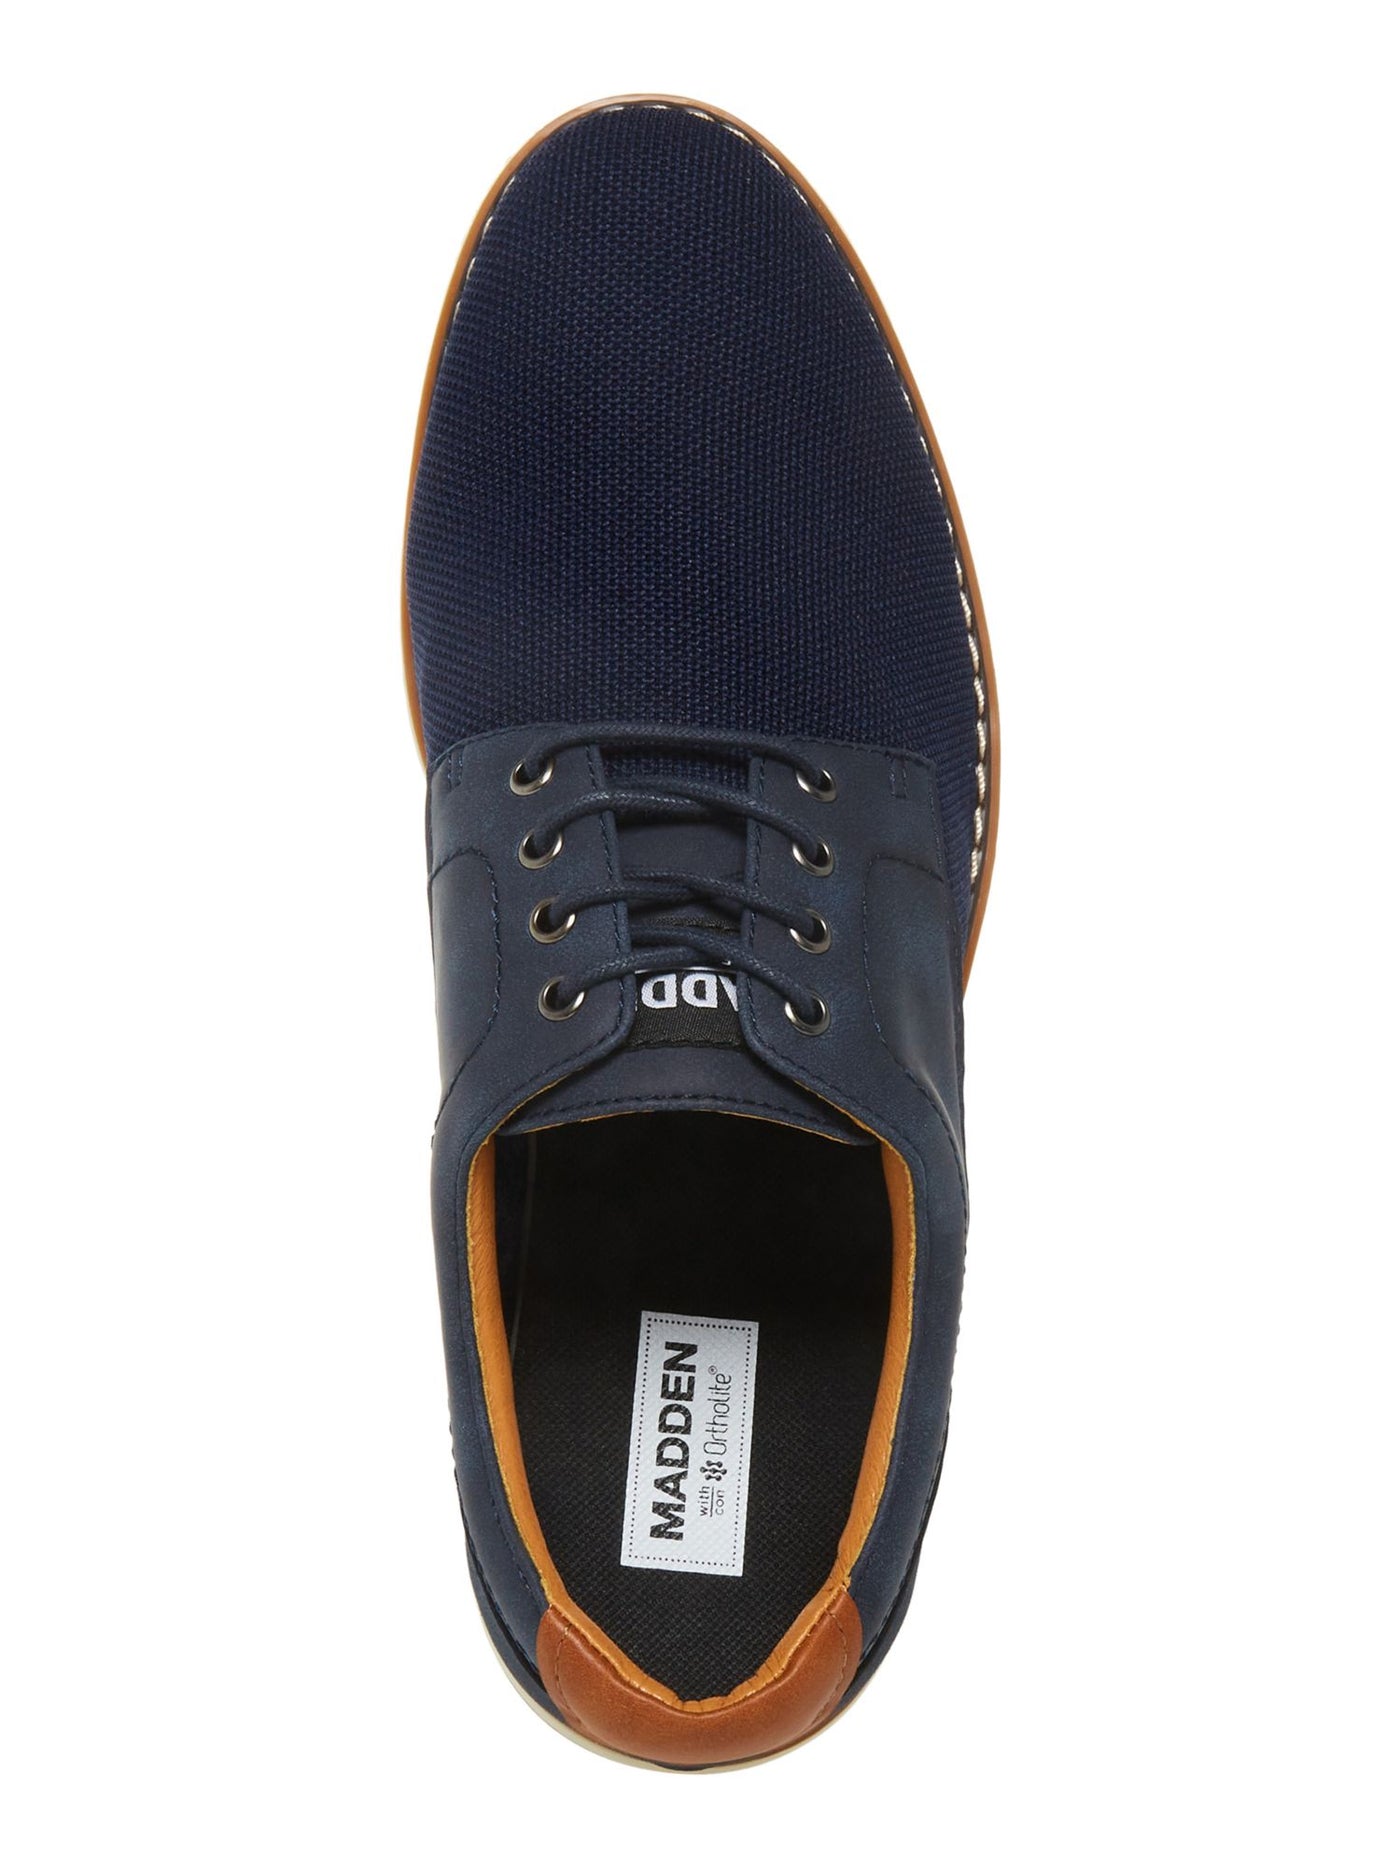 MADDEN Mens Navy Mixed Media Back Pull-Tab Padded Lonee Round Toe Lace-Up Dress Flats Shoes 8.5 M